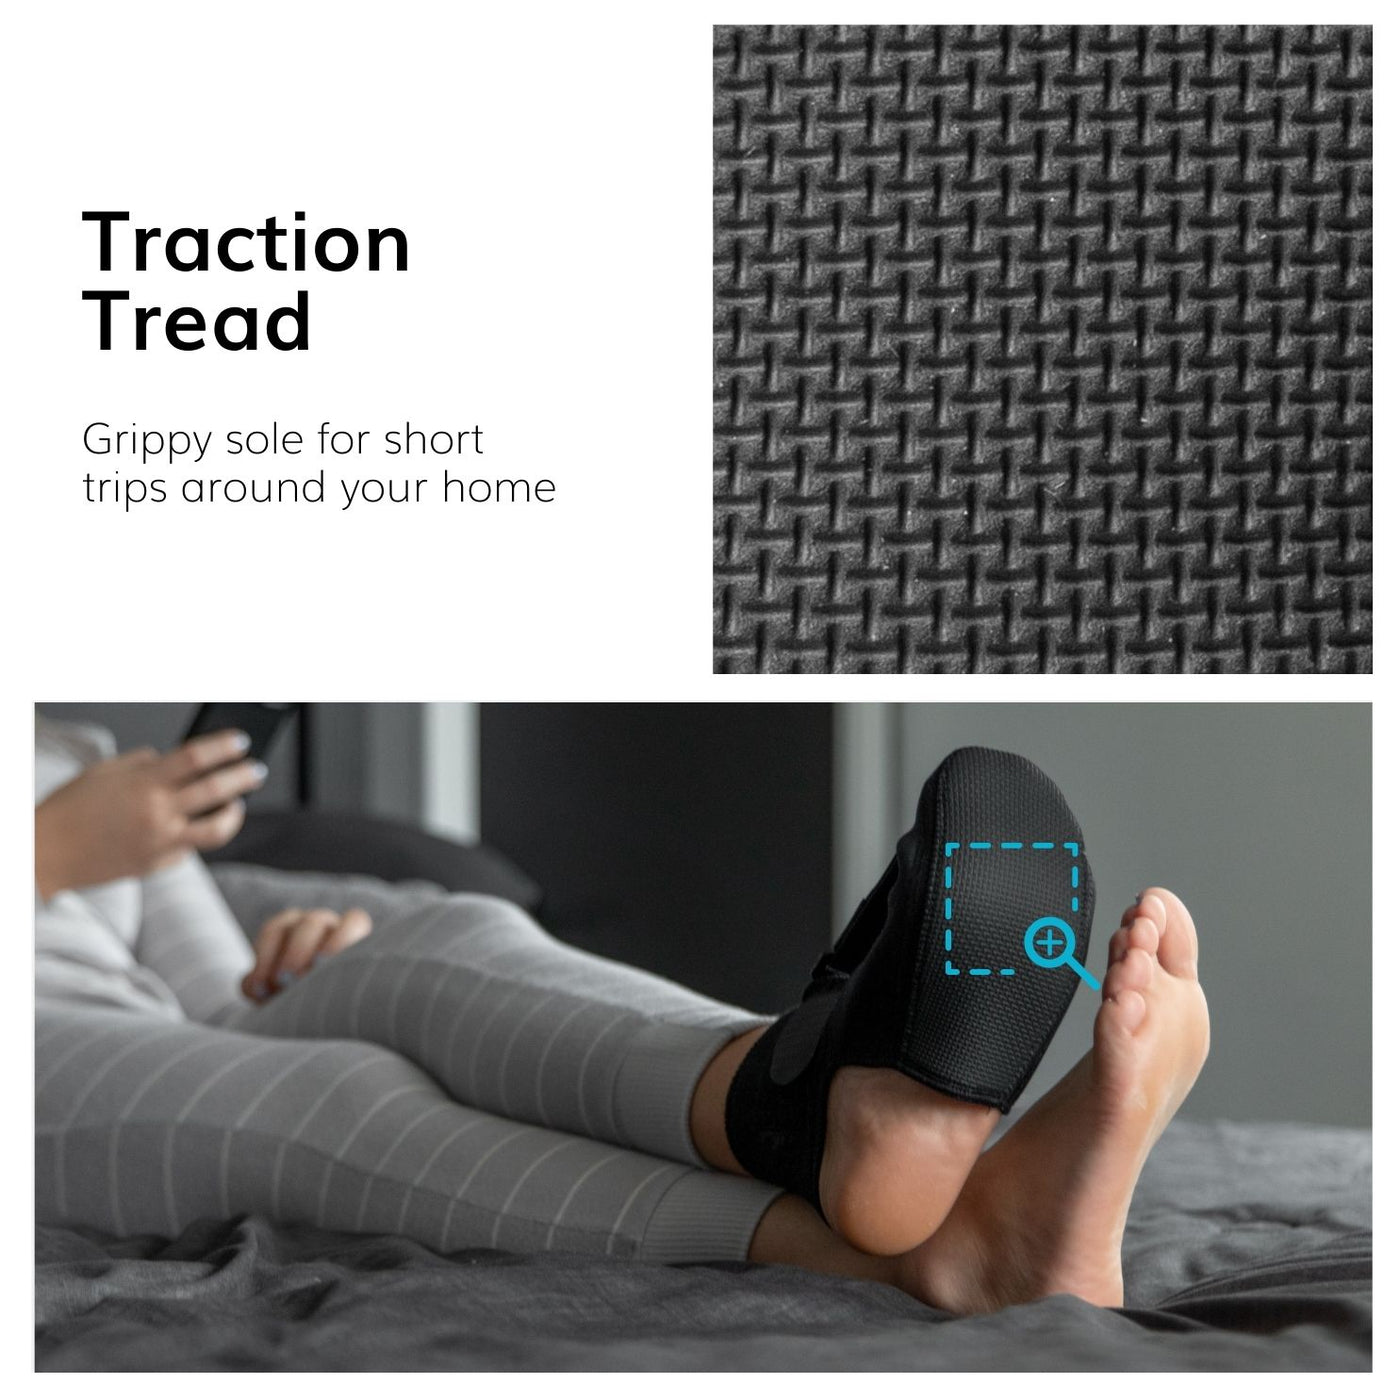 The nighttime plantar fascia stretcher has textured tread to give you some grip when walking